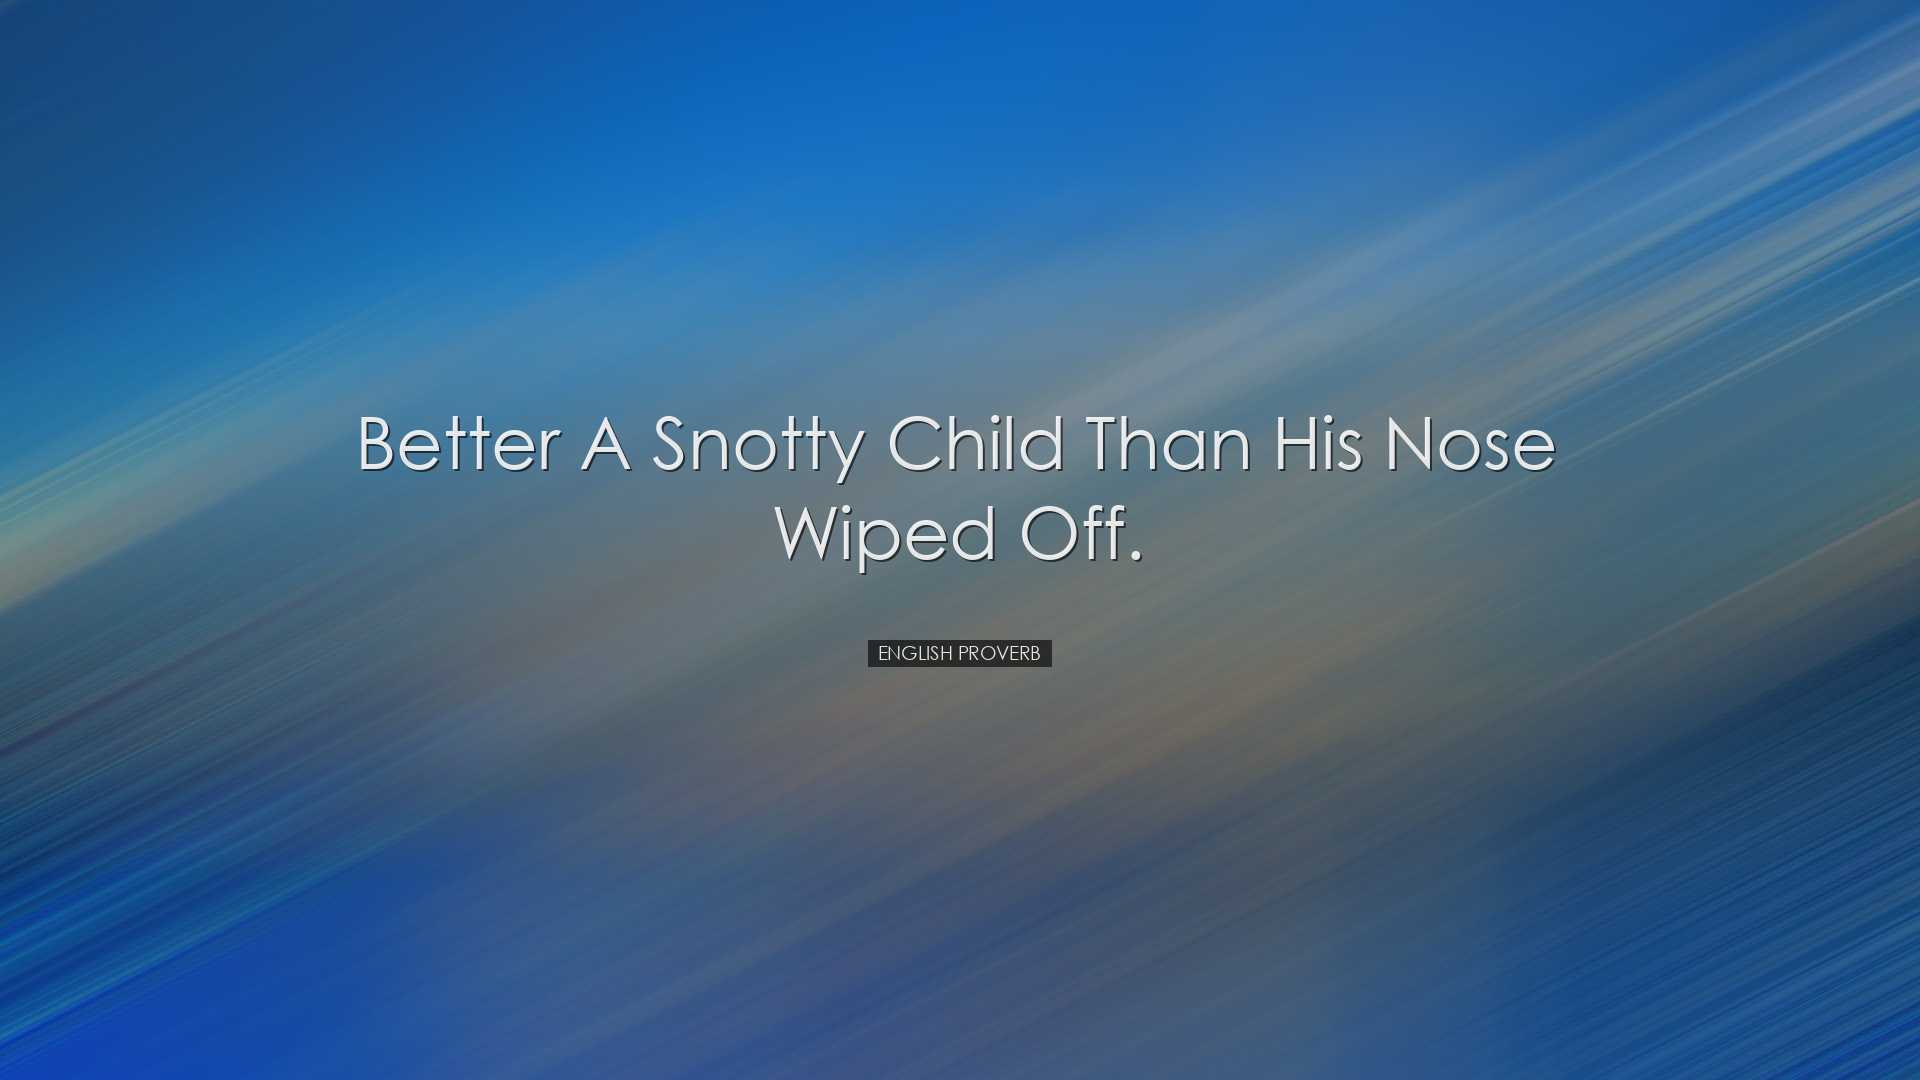 Better a snotty child than his nose wiped off. - English Proverb